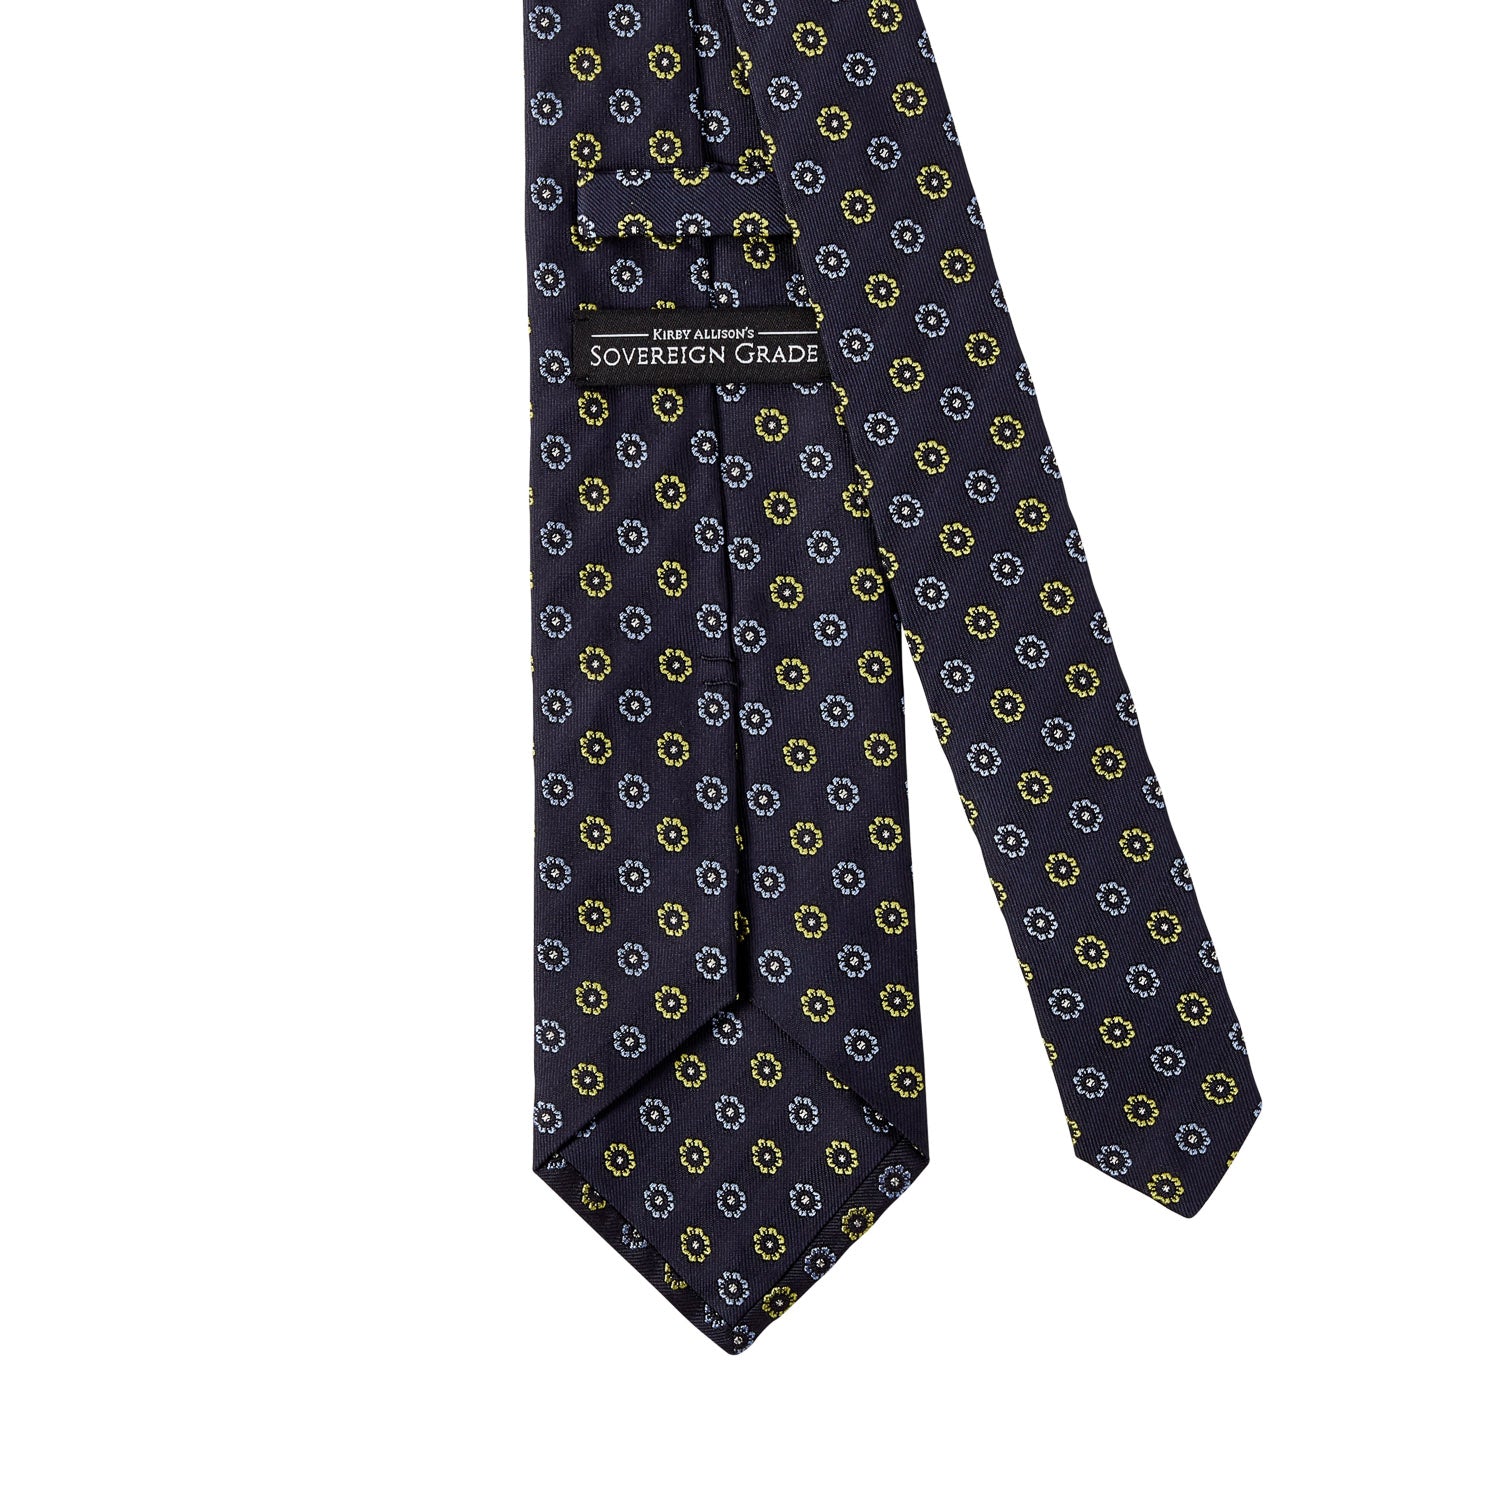 A Sovereign Grade Navy Blue and Lime Jacquard Tie, representing quality from KirbyAllison.com in the United Kingdom.